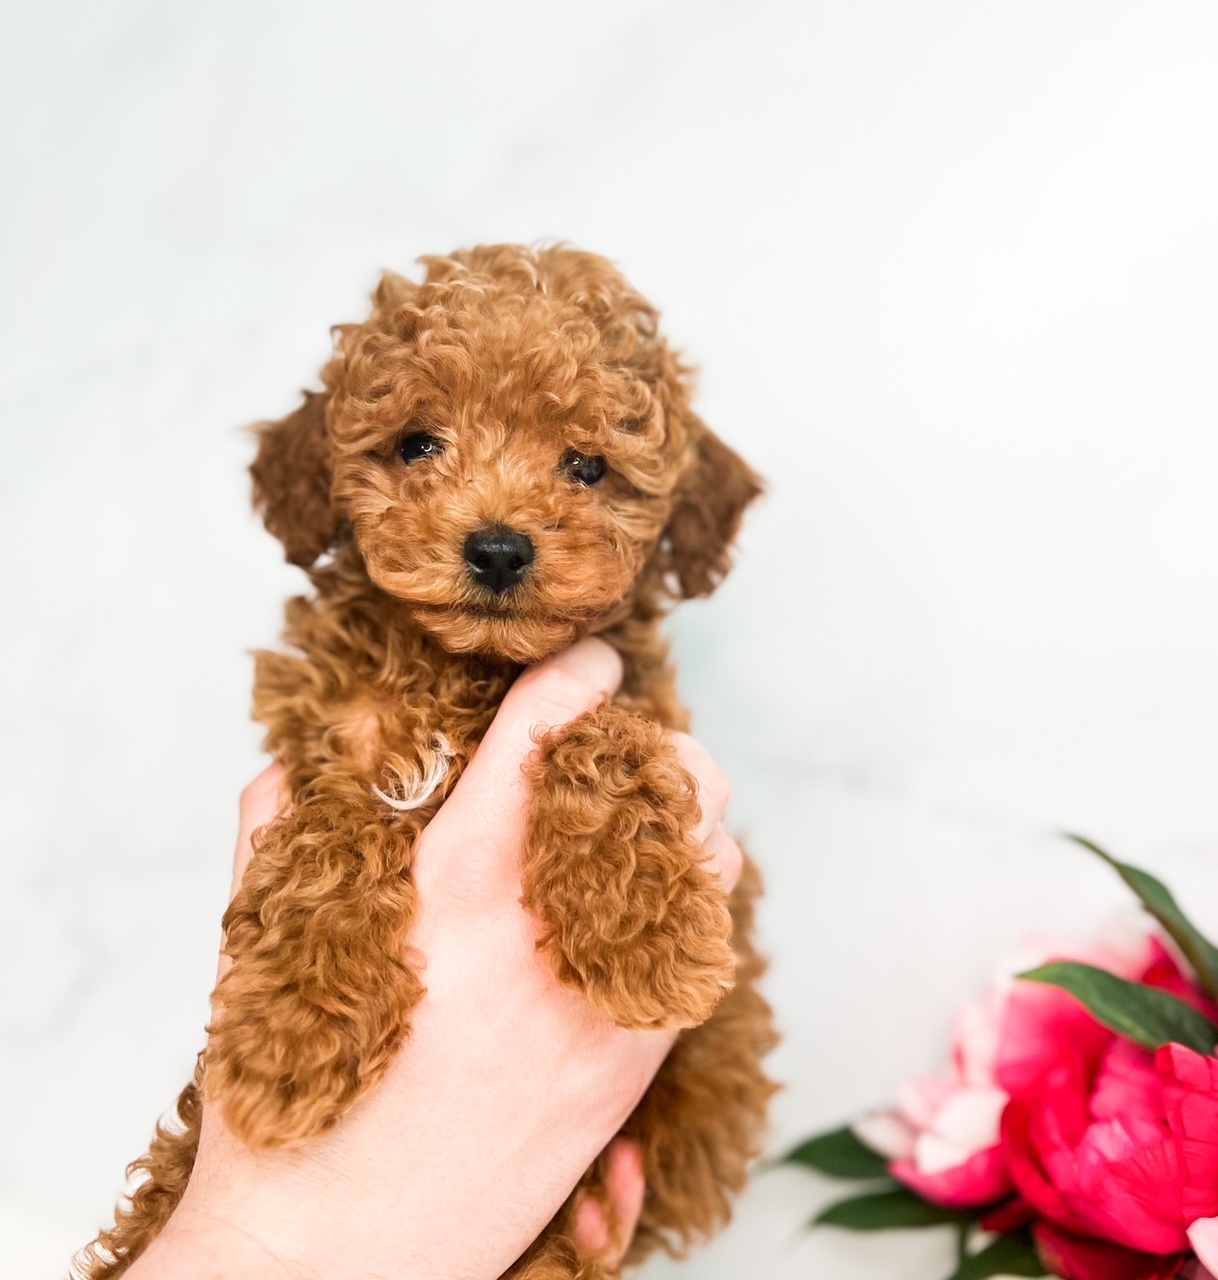 A person gently cradling a tiny brown toy poodle puppy in their hands.